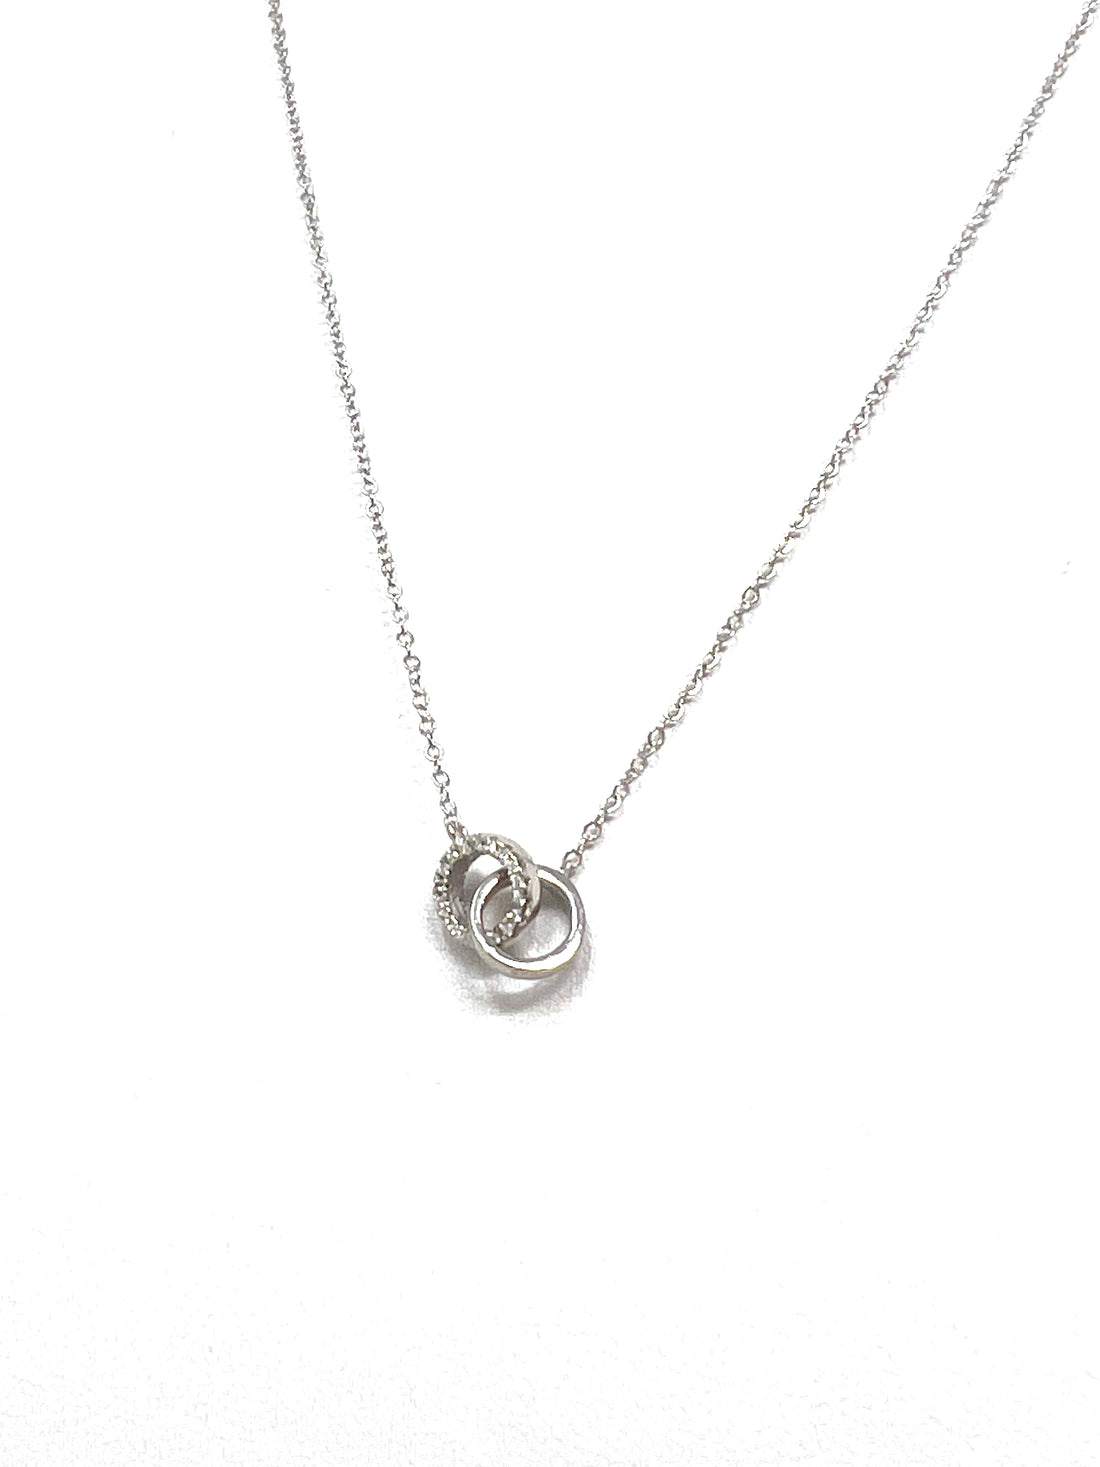 Pave Circles Necklace in Silver